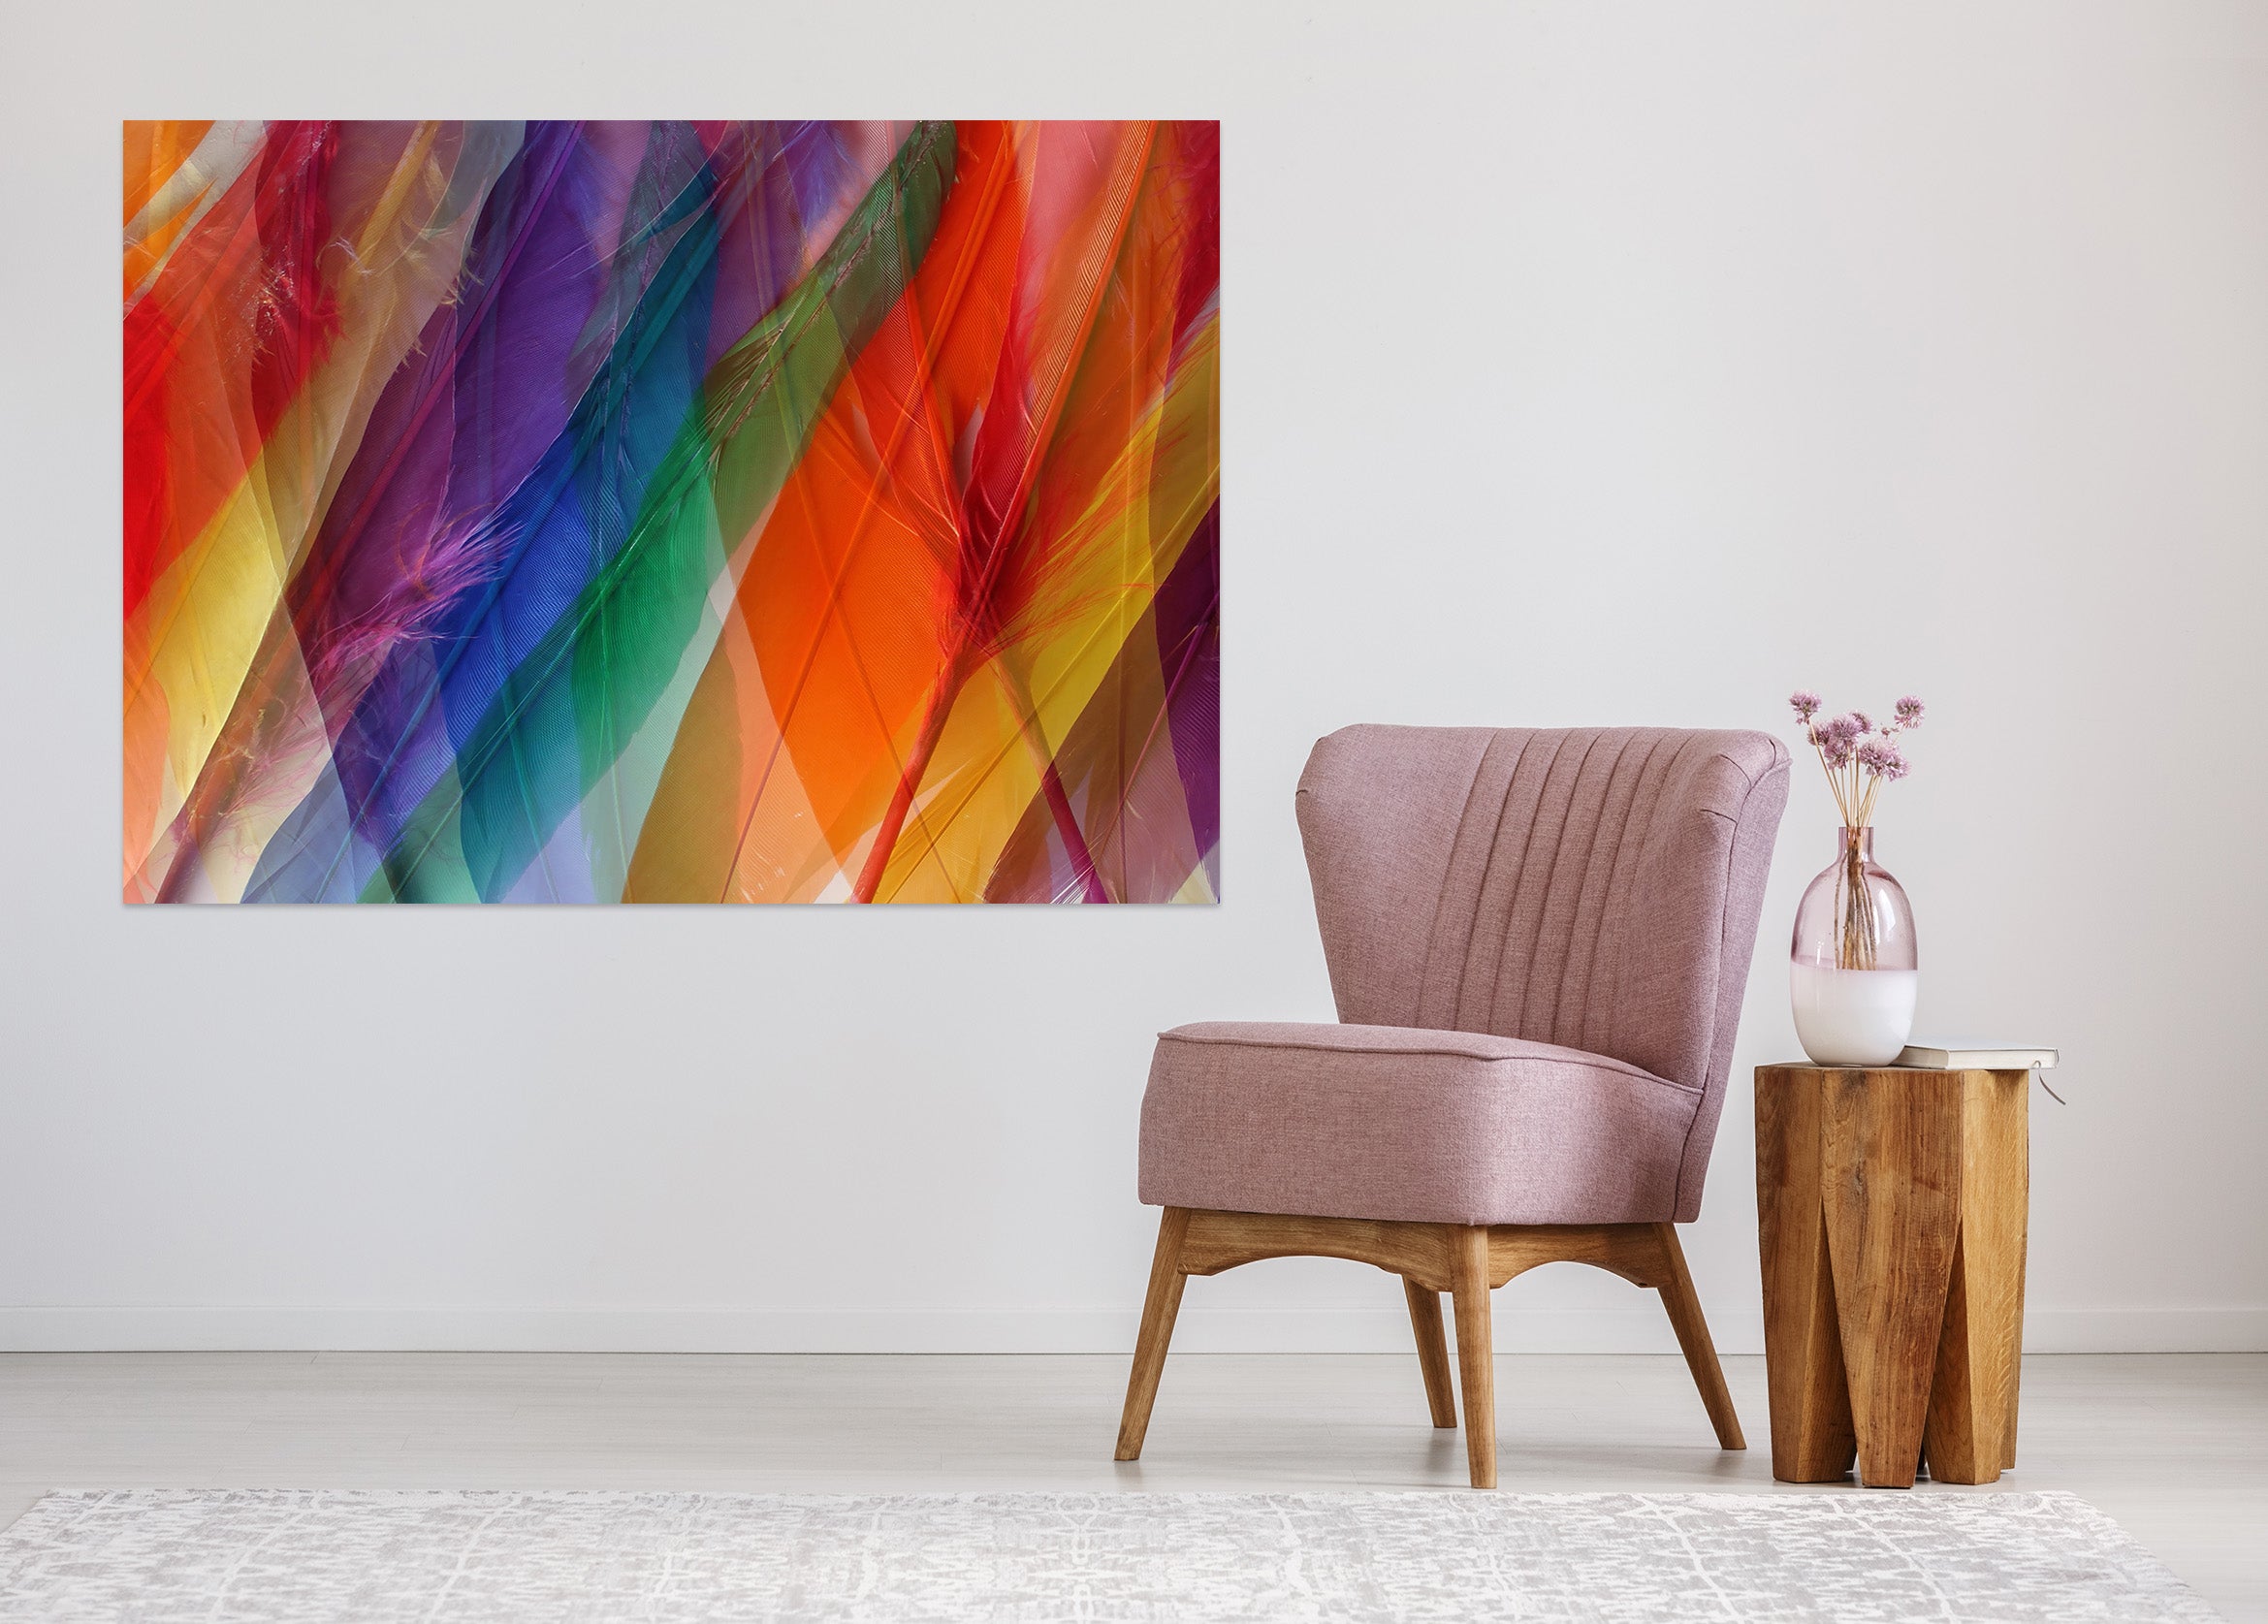 3D Colored Feathers 71101 Shandra Smith Wall Sticker